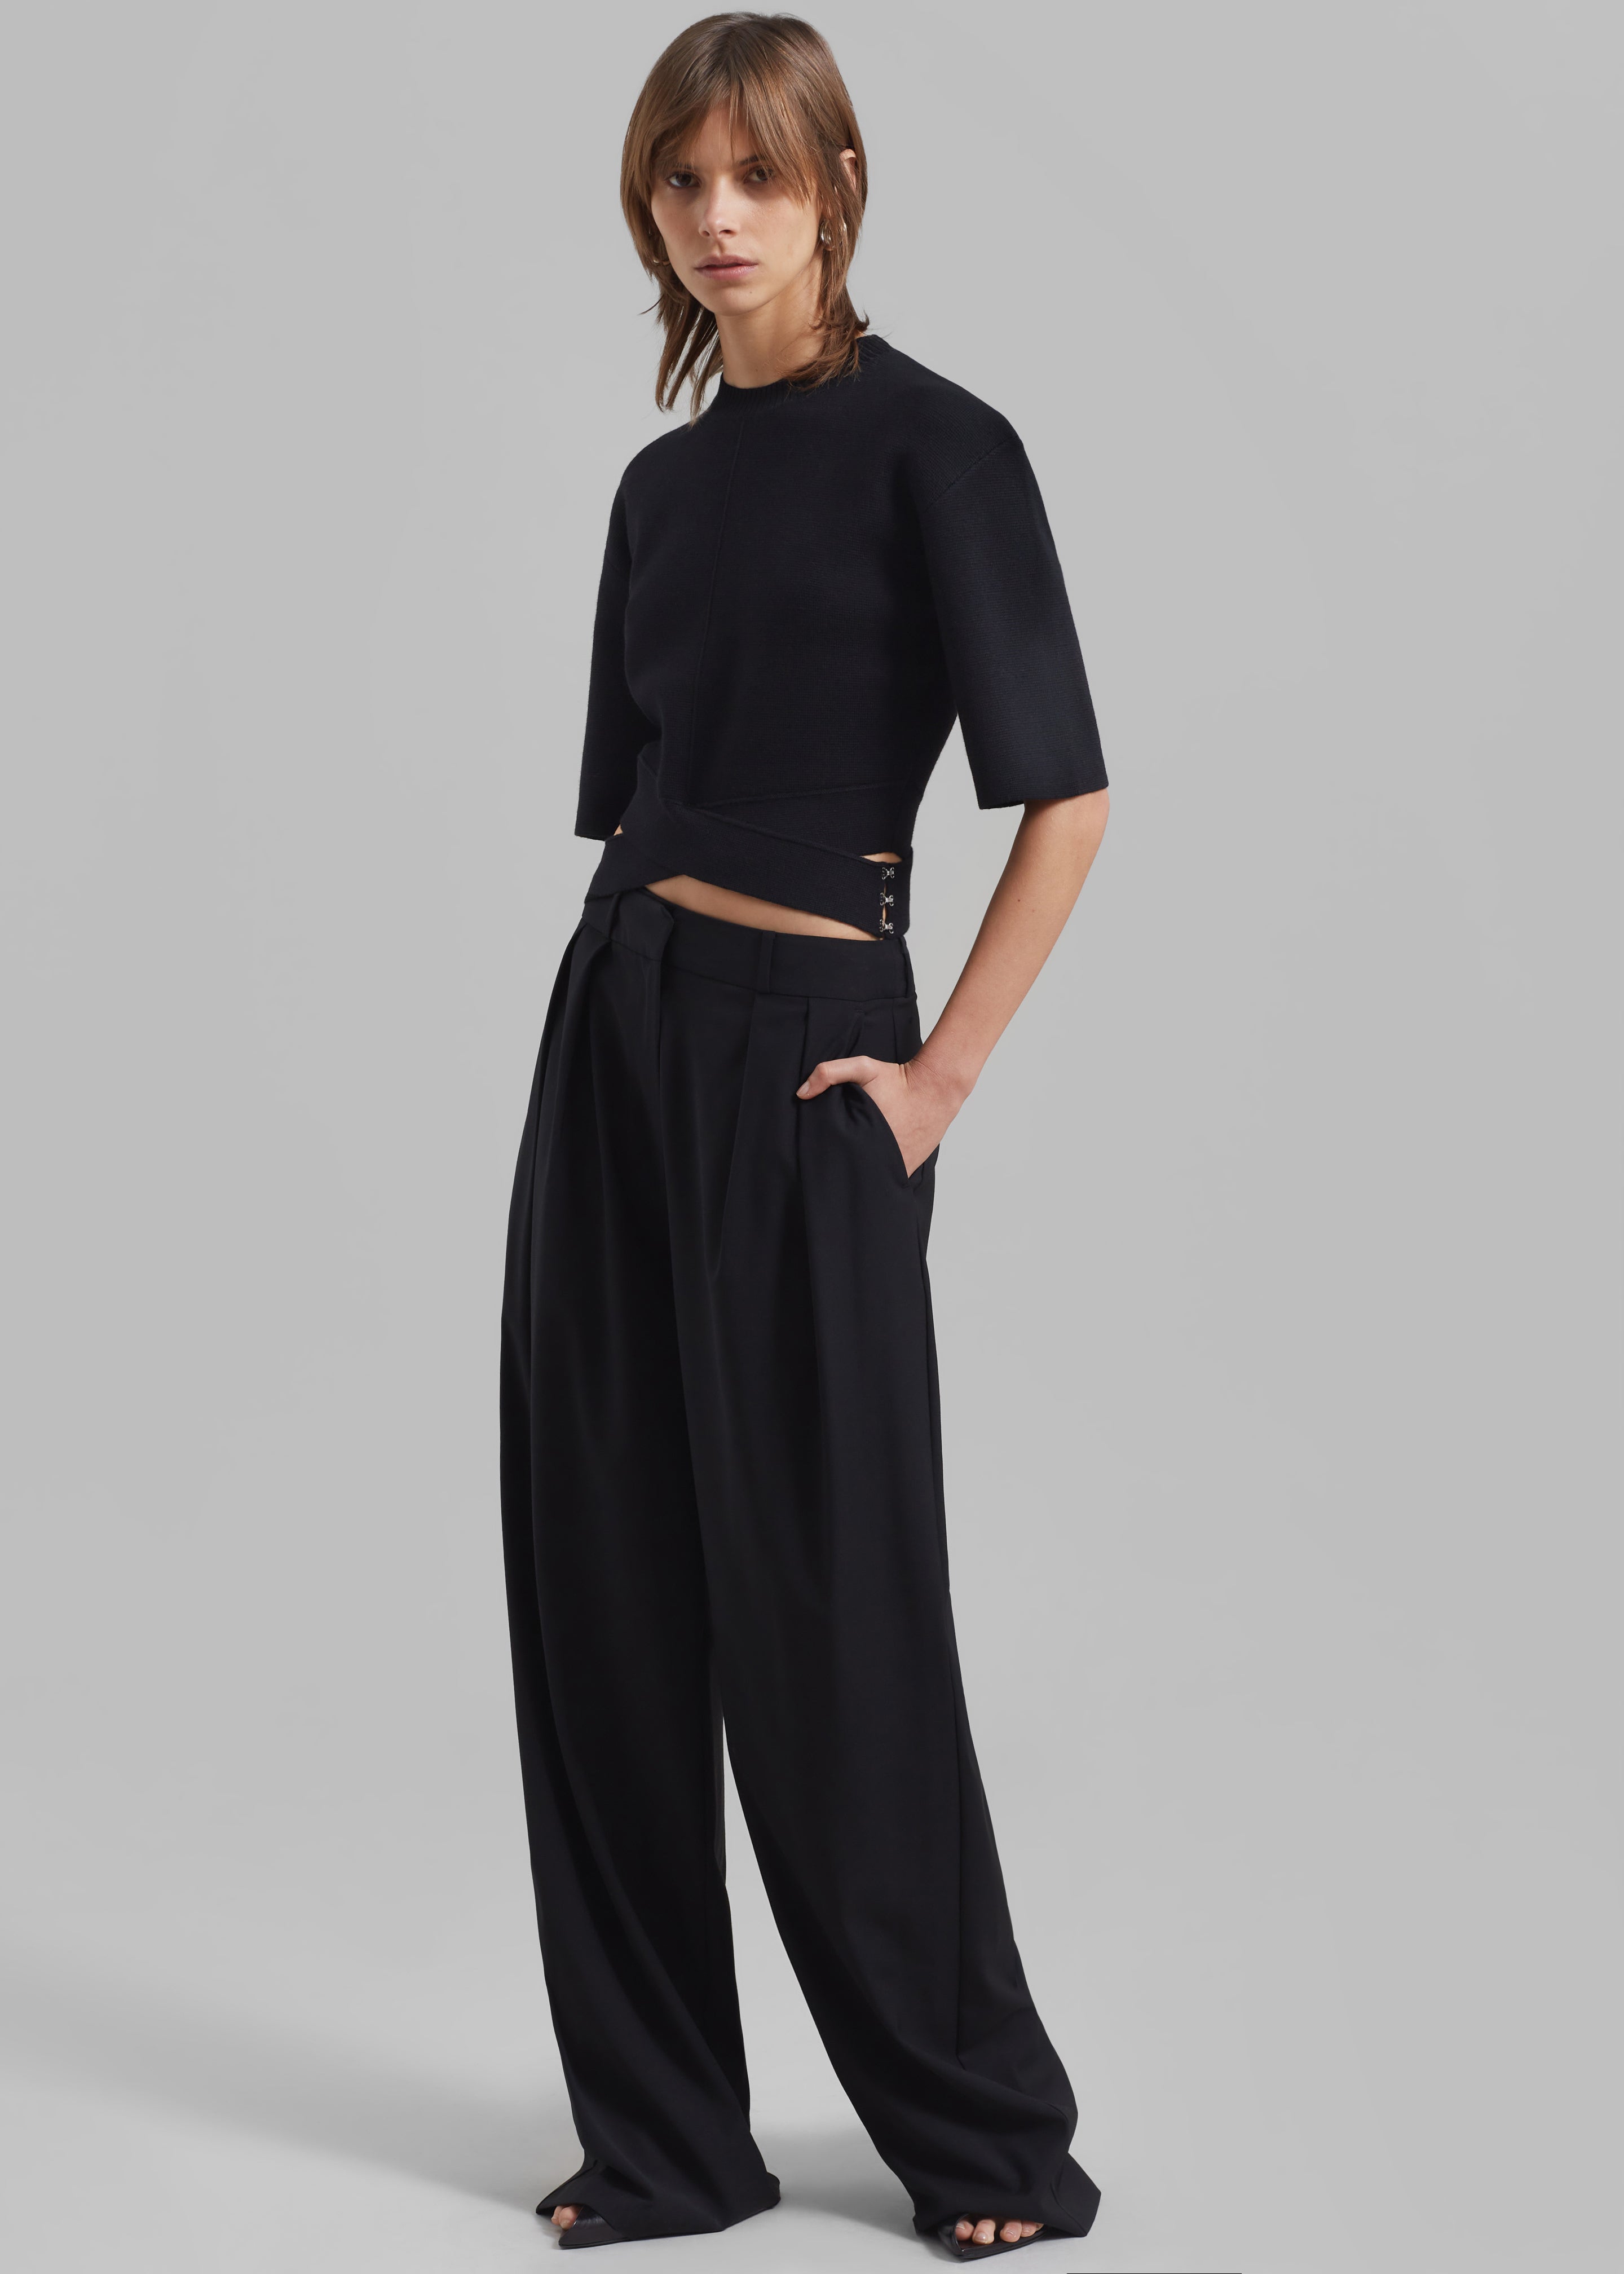 Ripley Pleated Trousers - Black - 1